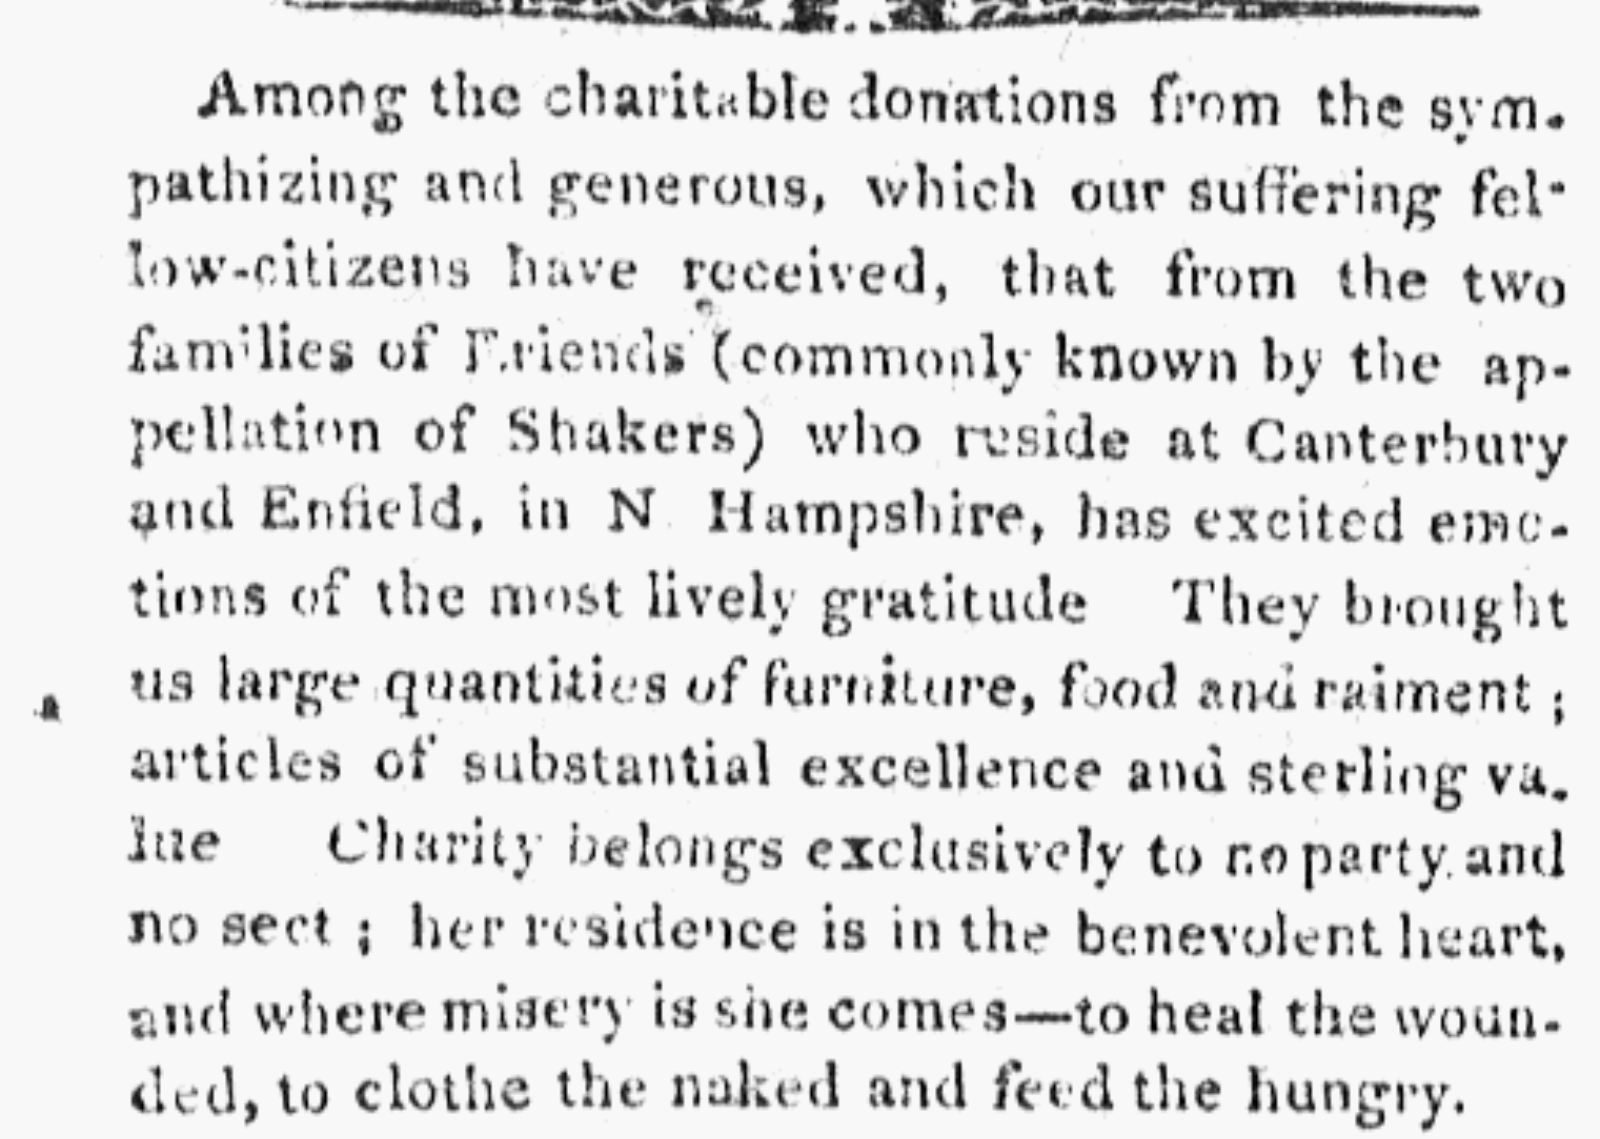 Enfield Shakers - Donations 1811